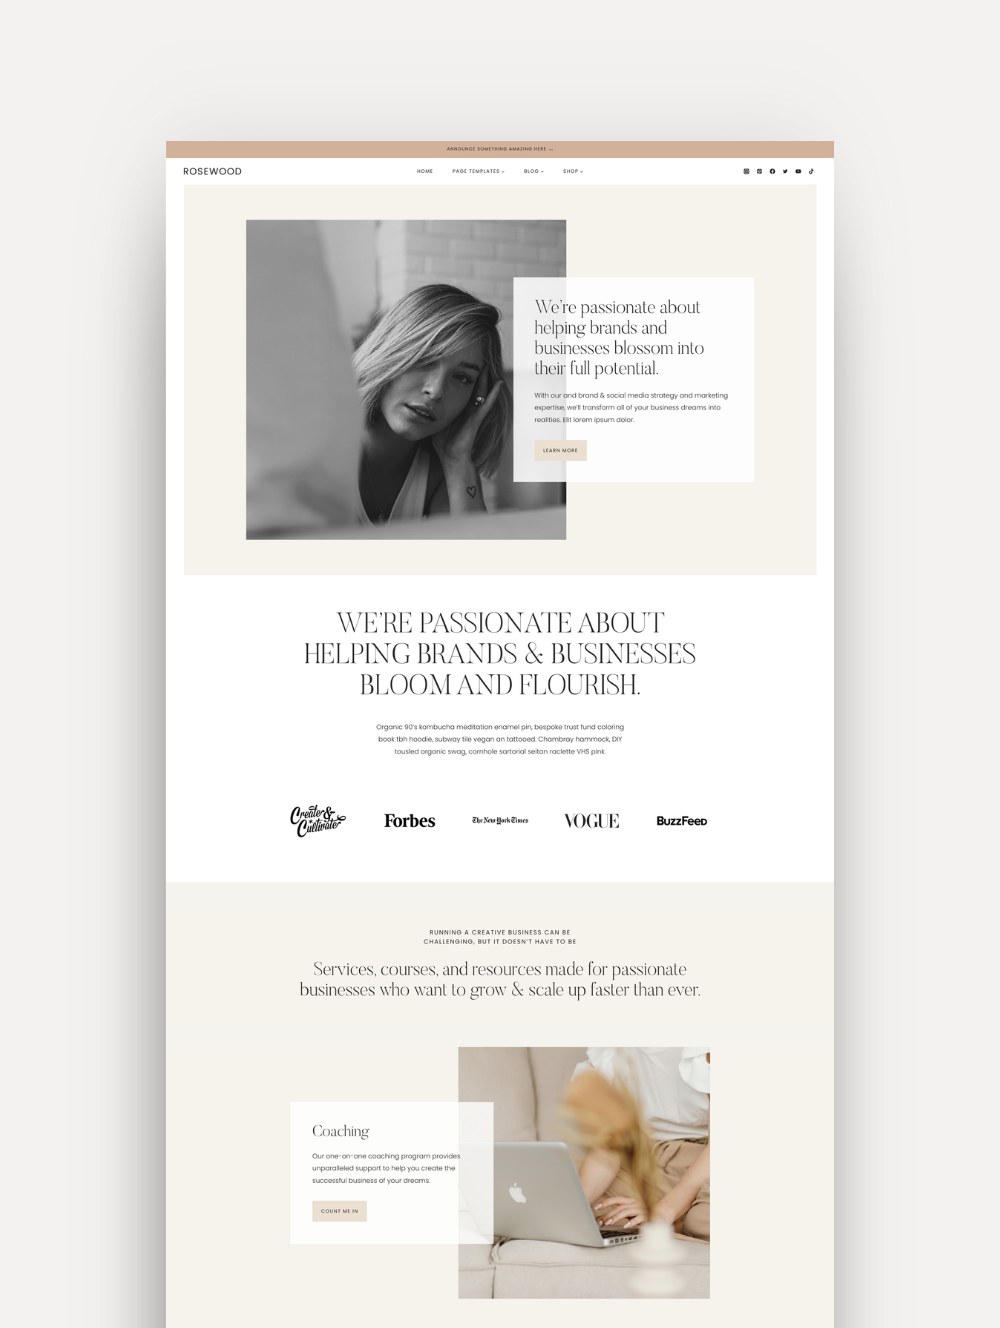 Mockup of a feminine and timeless WordPress theme designed on the Kadence theme, showcasing elegant and clean typography and design elements